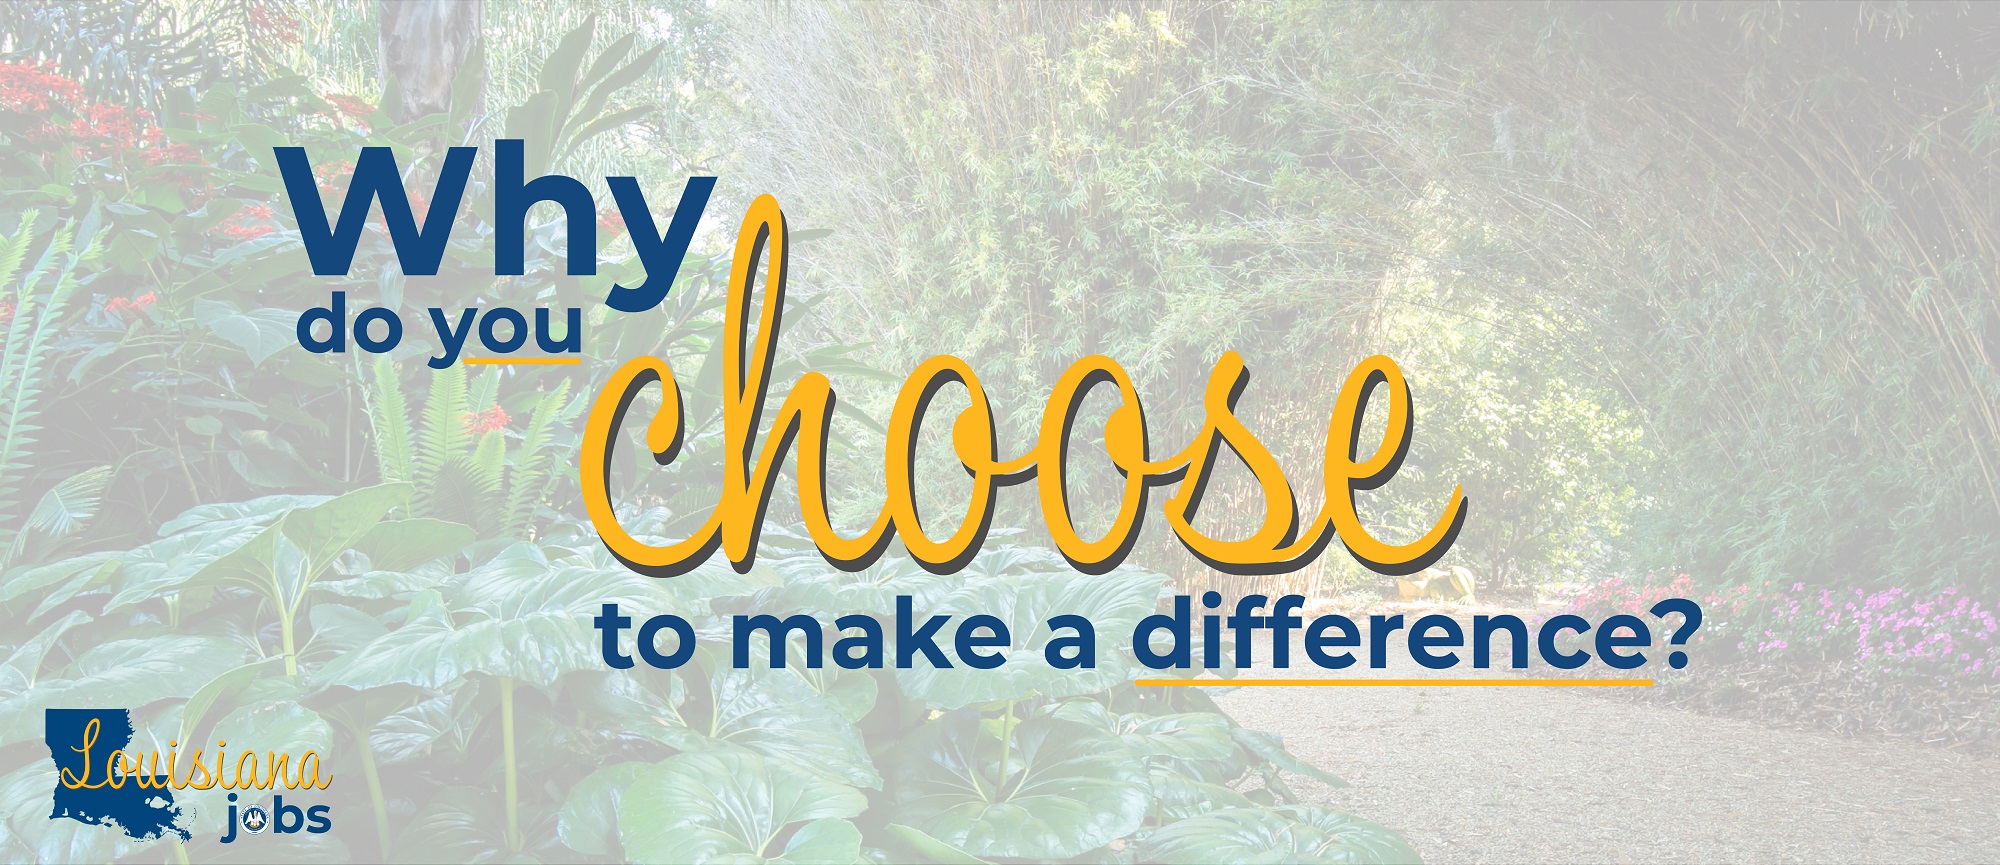 Why do you choose to make a difference?